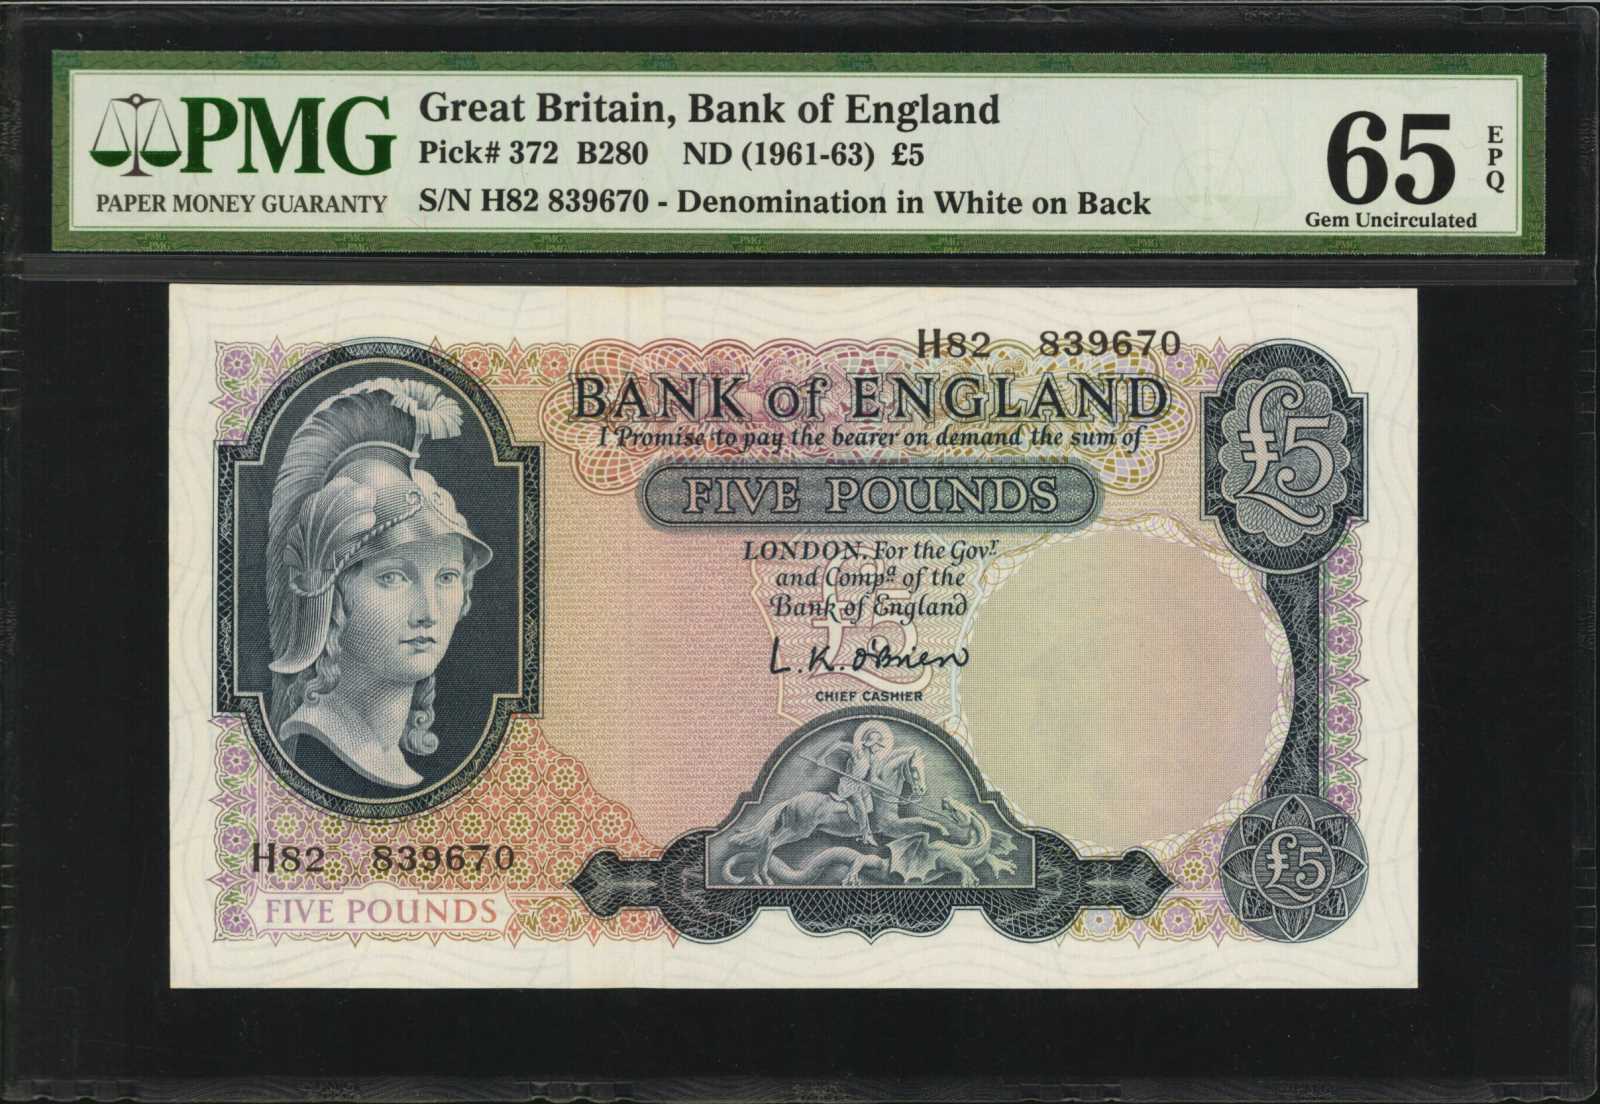 GREAT BRITAIN. Bank of England. 5 Pounds, ND (1961-63). P-372. PMG 